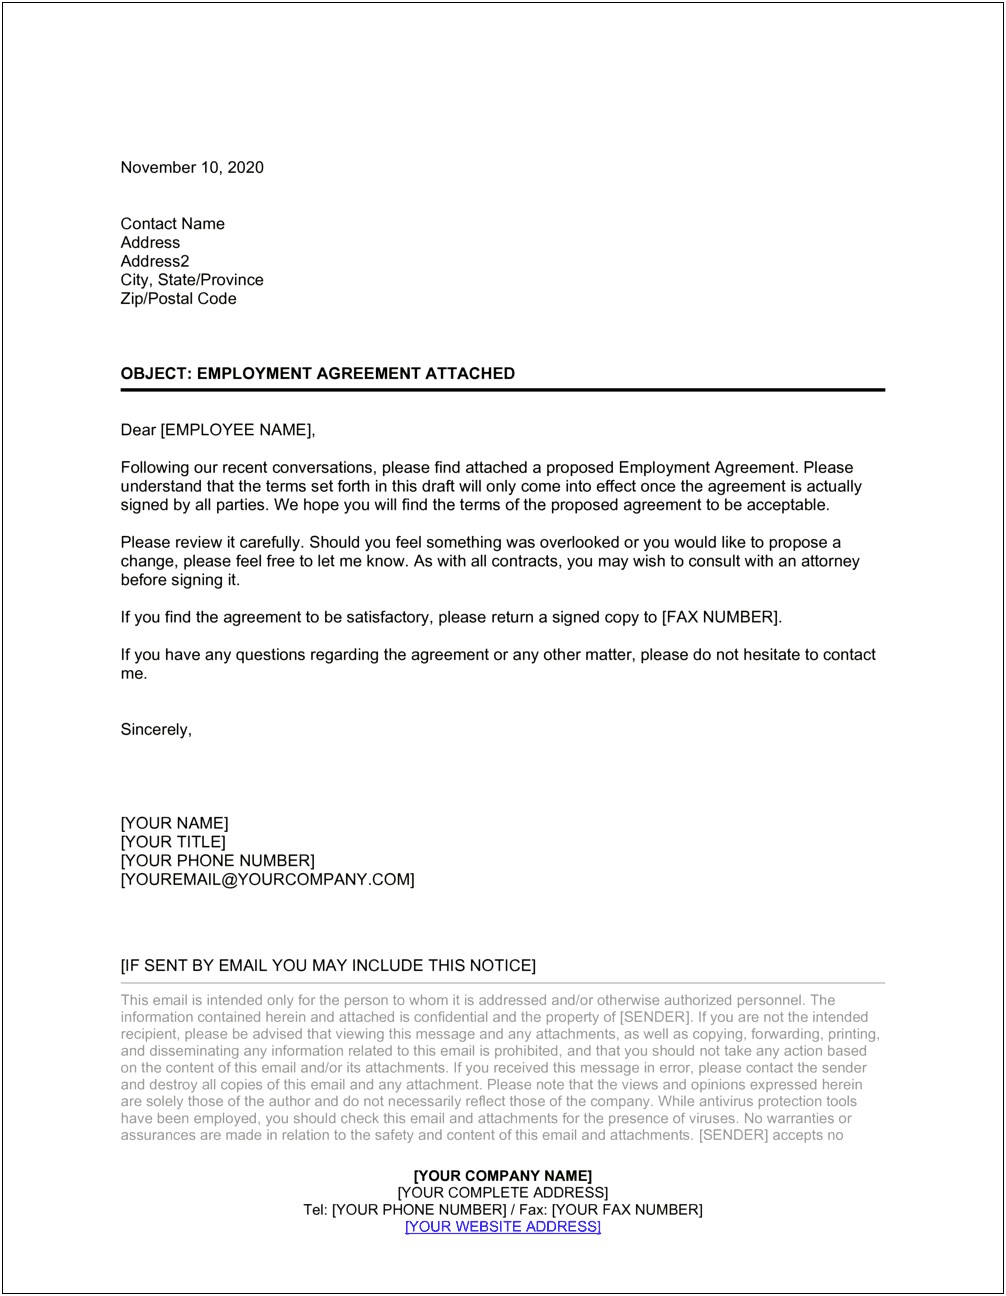 50 5000 An Employee's Cover Letter Template